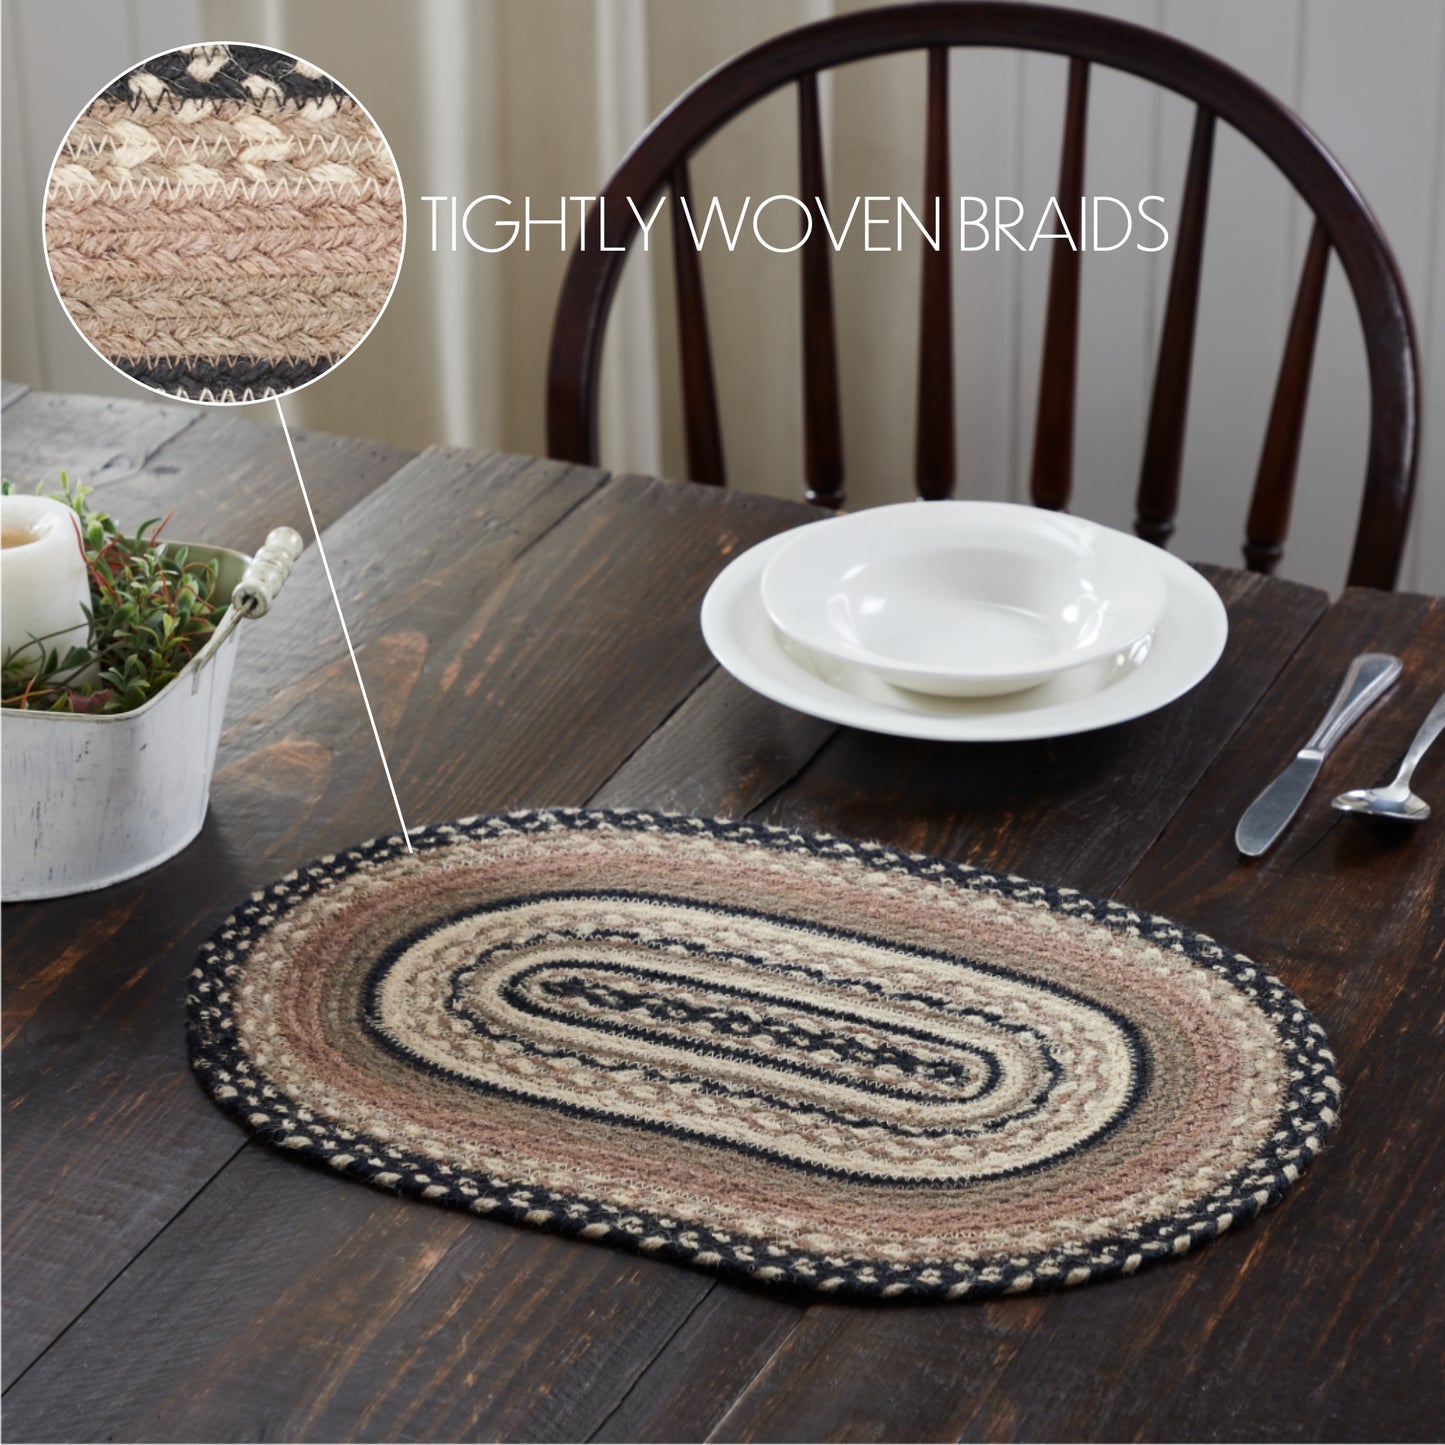 81448-Sawyer-Mill-Charcoal-Creme-Jute-Oval-Placemat-12x18-image-2